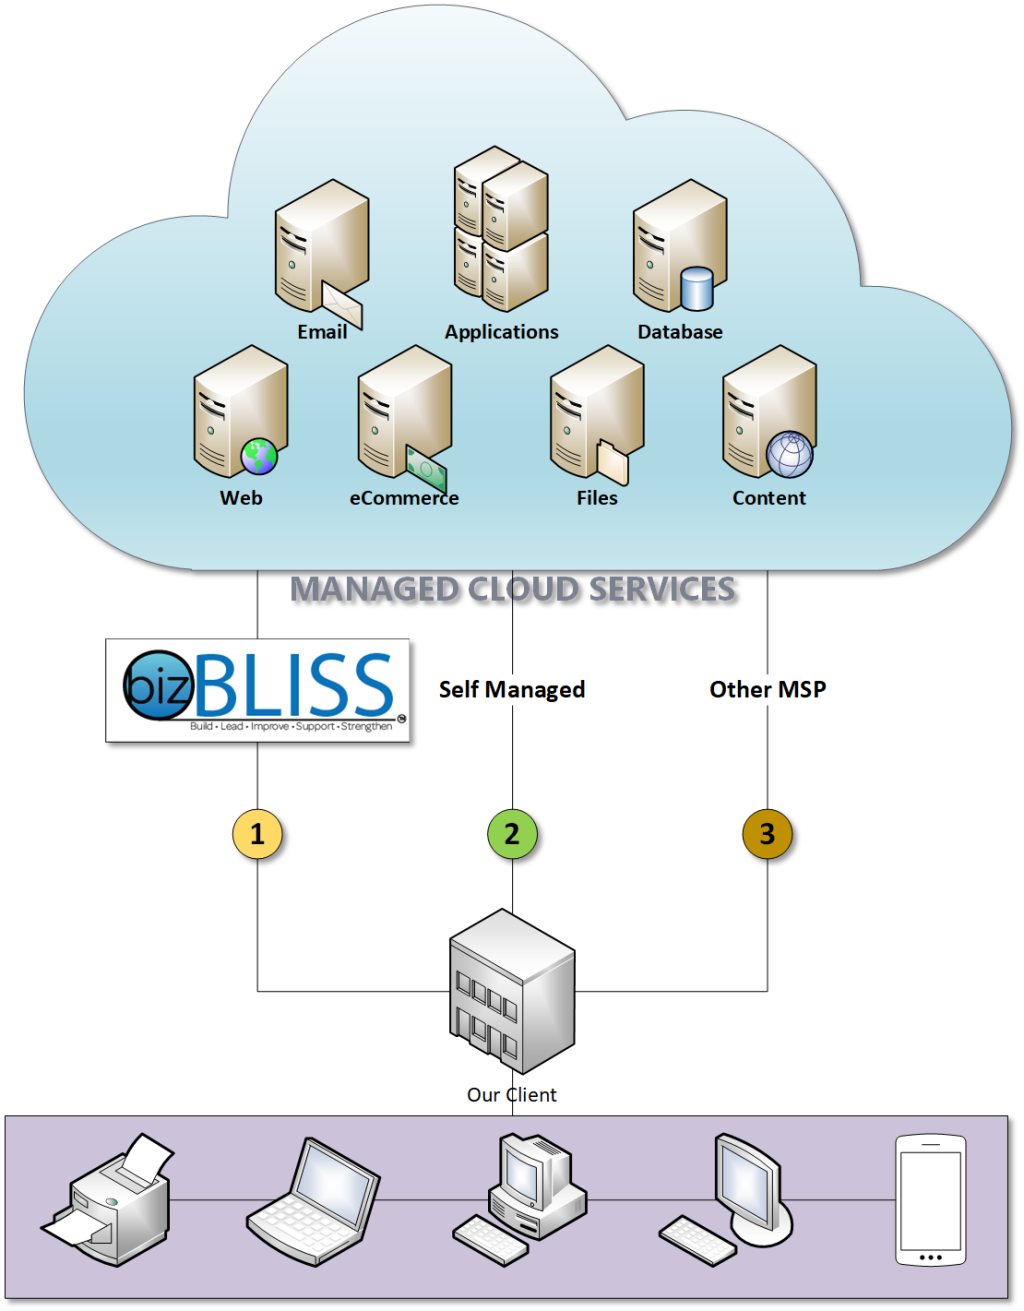 Overview of how bizbliss can provide cloud services right for our client